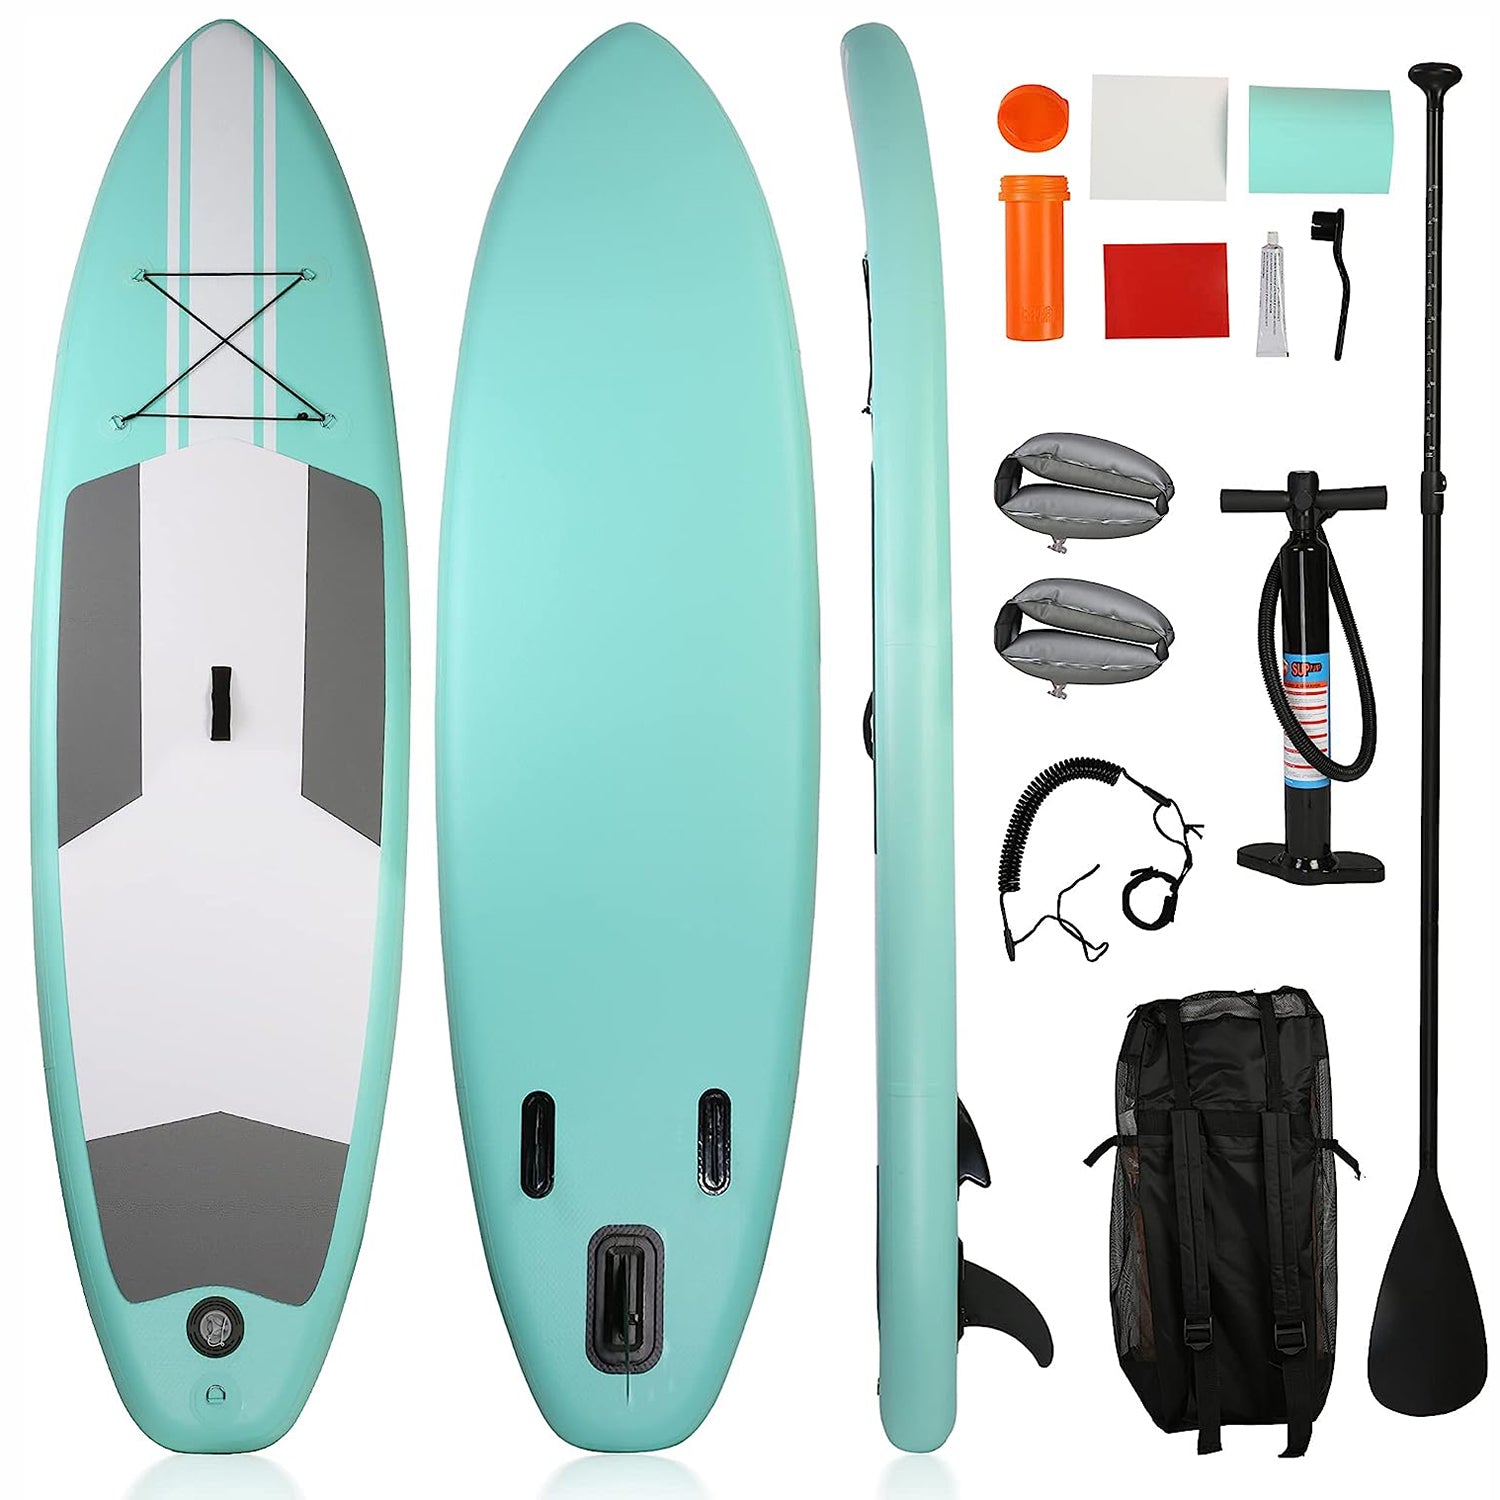 LUCKYERMORE 10'x31''x6'' Inflatable Stand Up Paddle Board with SUP Accessories & Carry Bag, Green